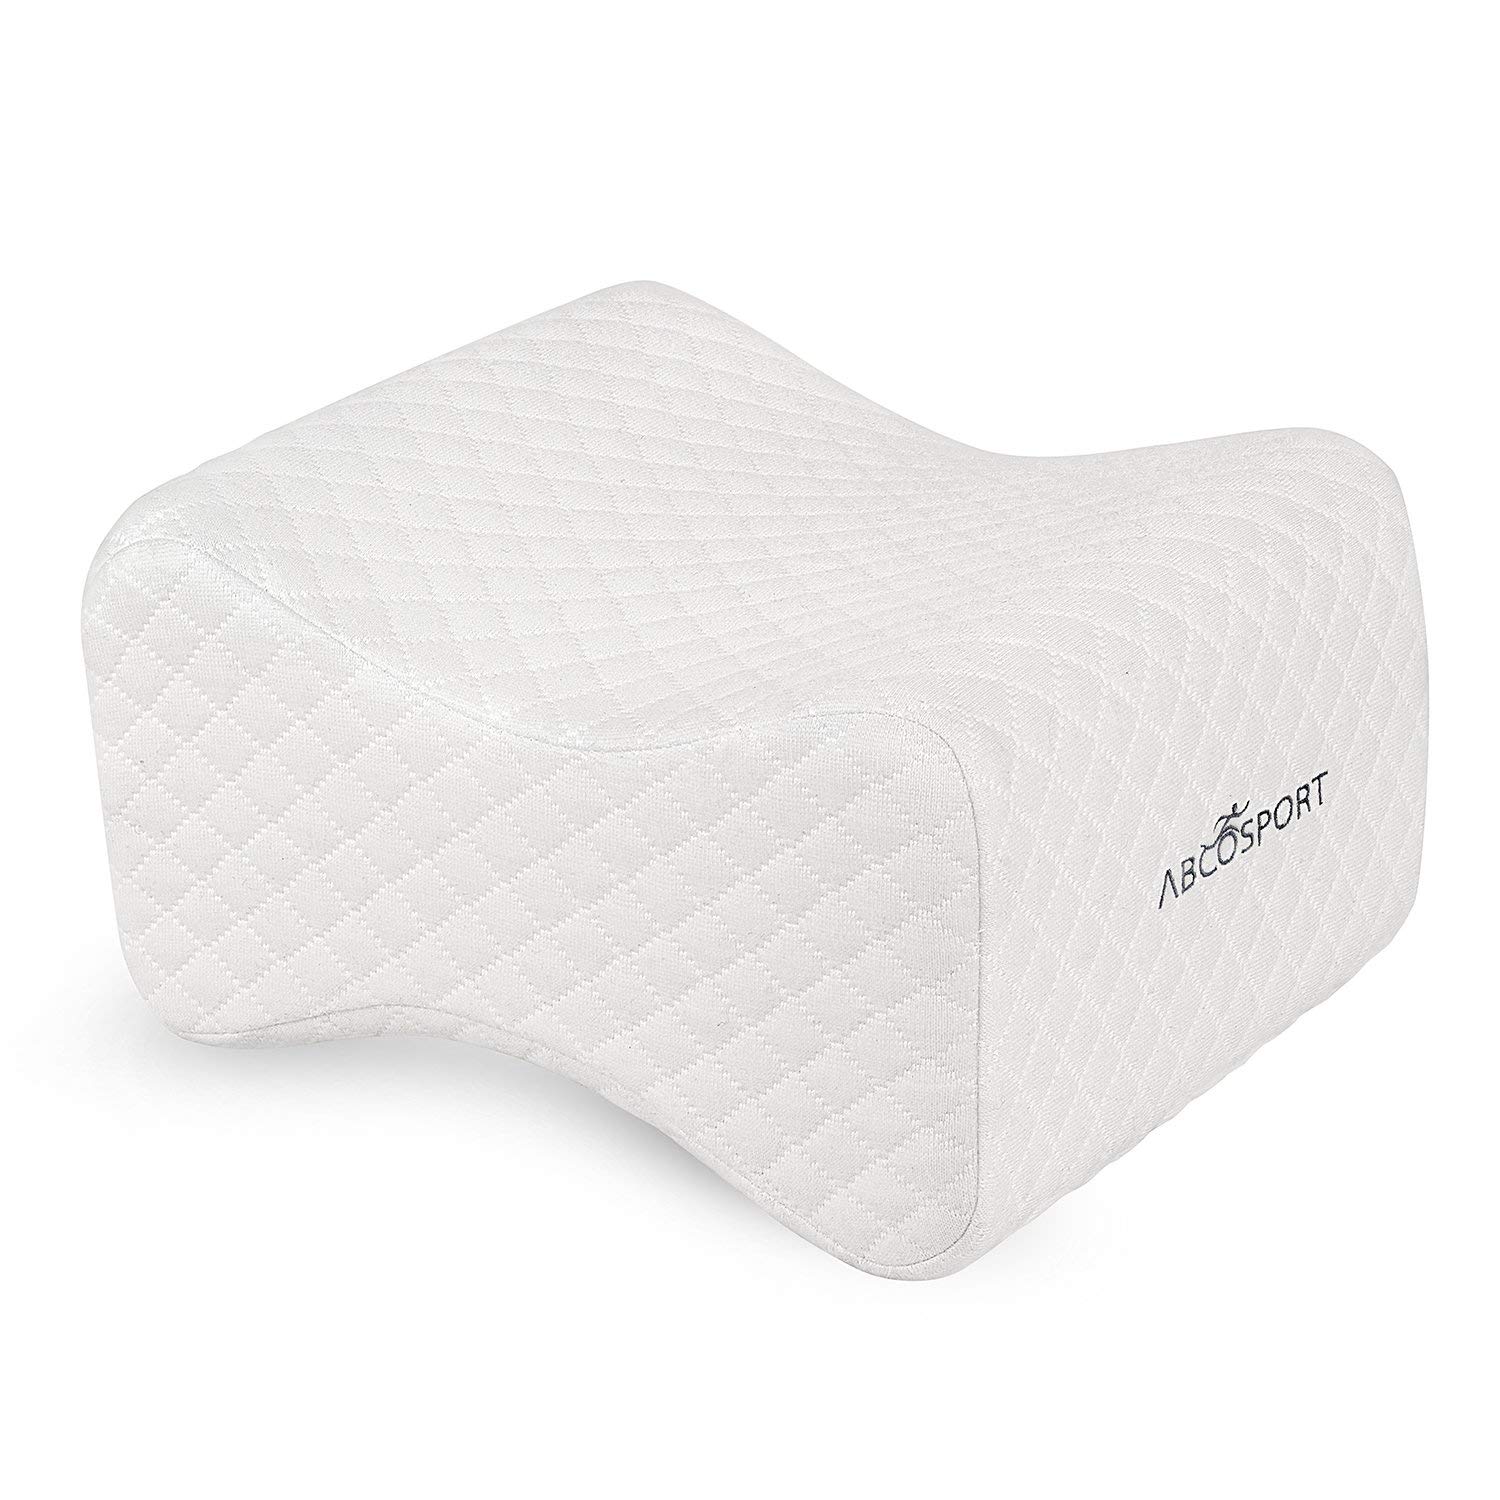 Knee pillow – ideal choice for hip, back, leg, knee pain, side sleepers, pregnancy & right spine alignment – premium comfortable memory foam wedge contour w washable cover & storage bag (white)